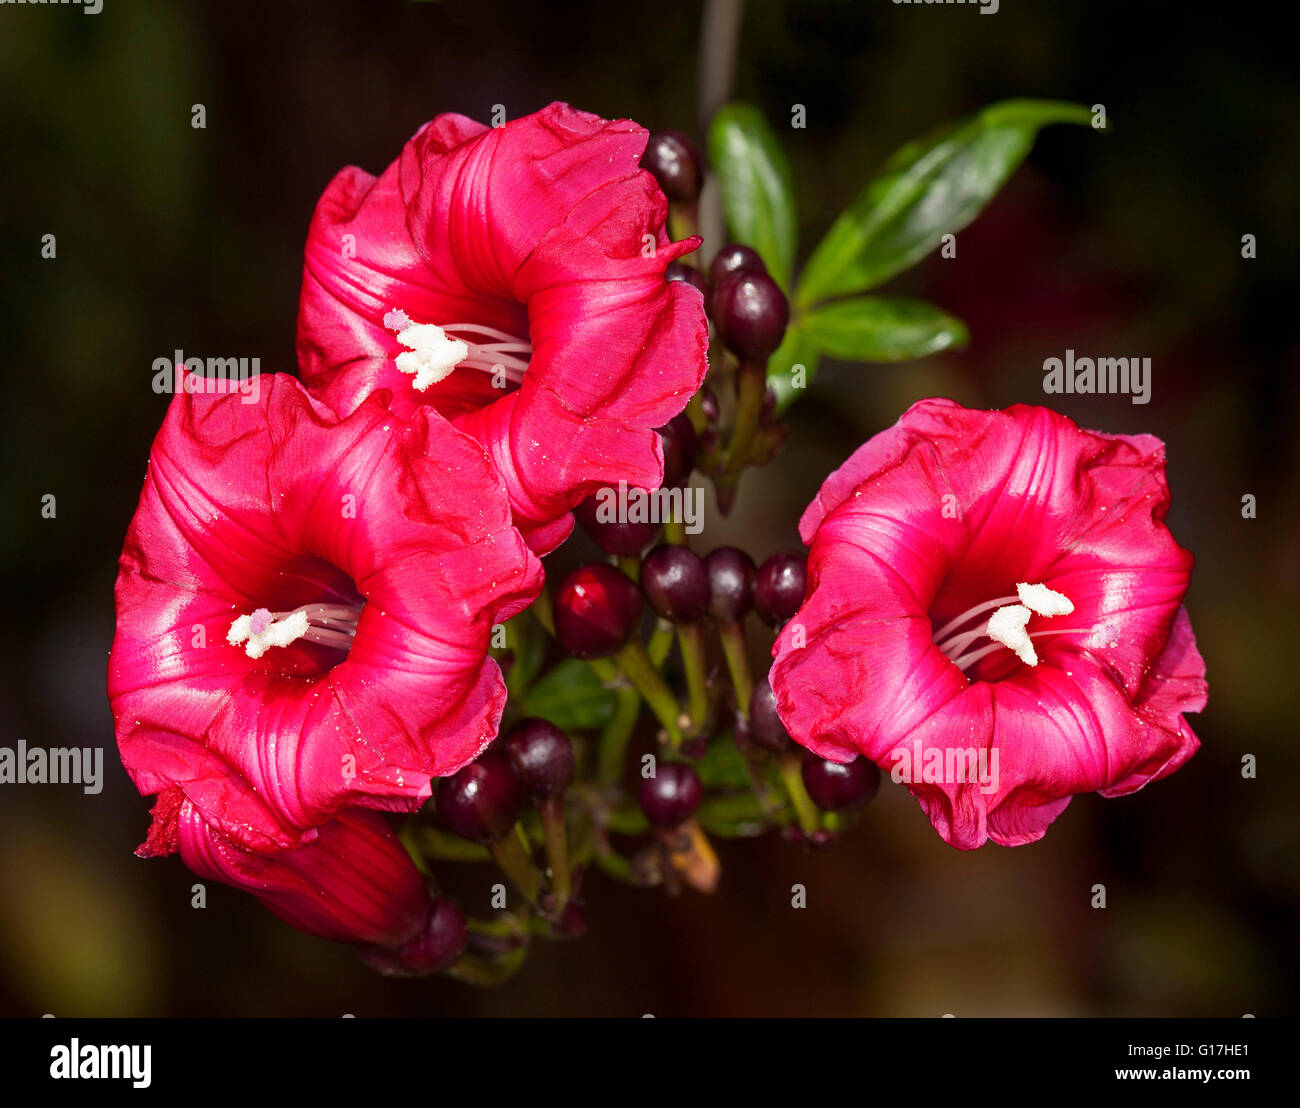 Cluster of stunning vivid red flowers, dark buds and emerald leaves of cardinal climber Ipomoea horsfalliae on dark background, Stock Photo